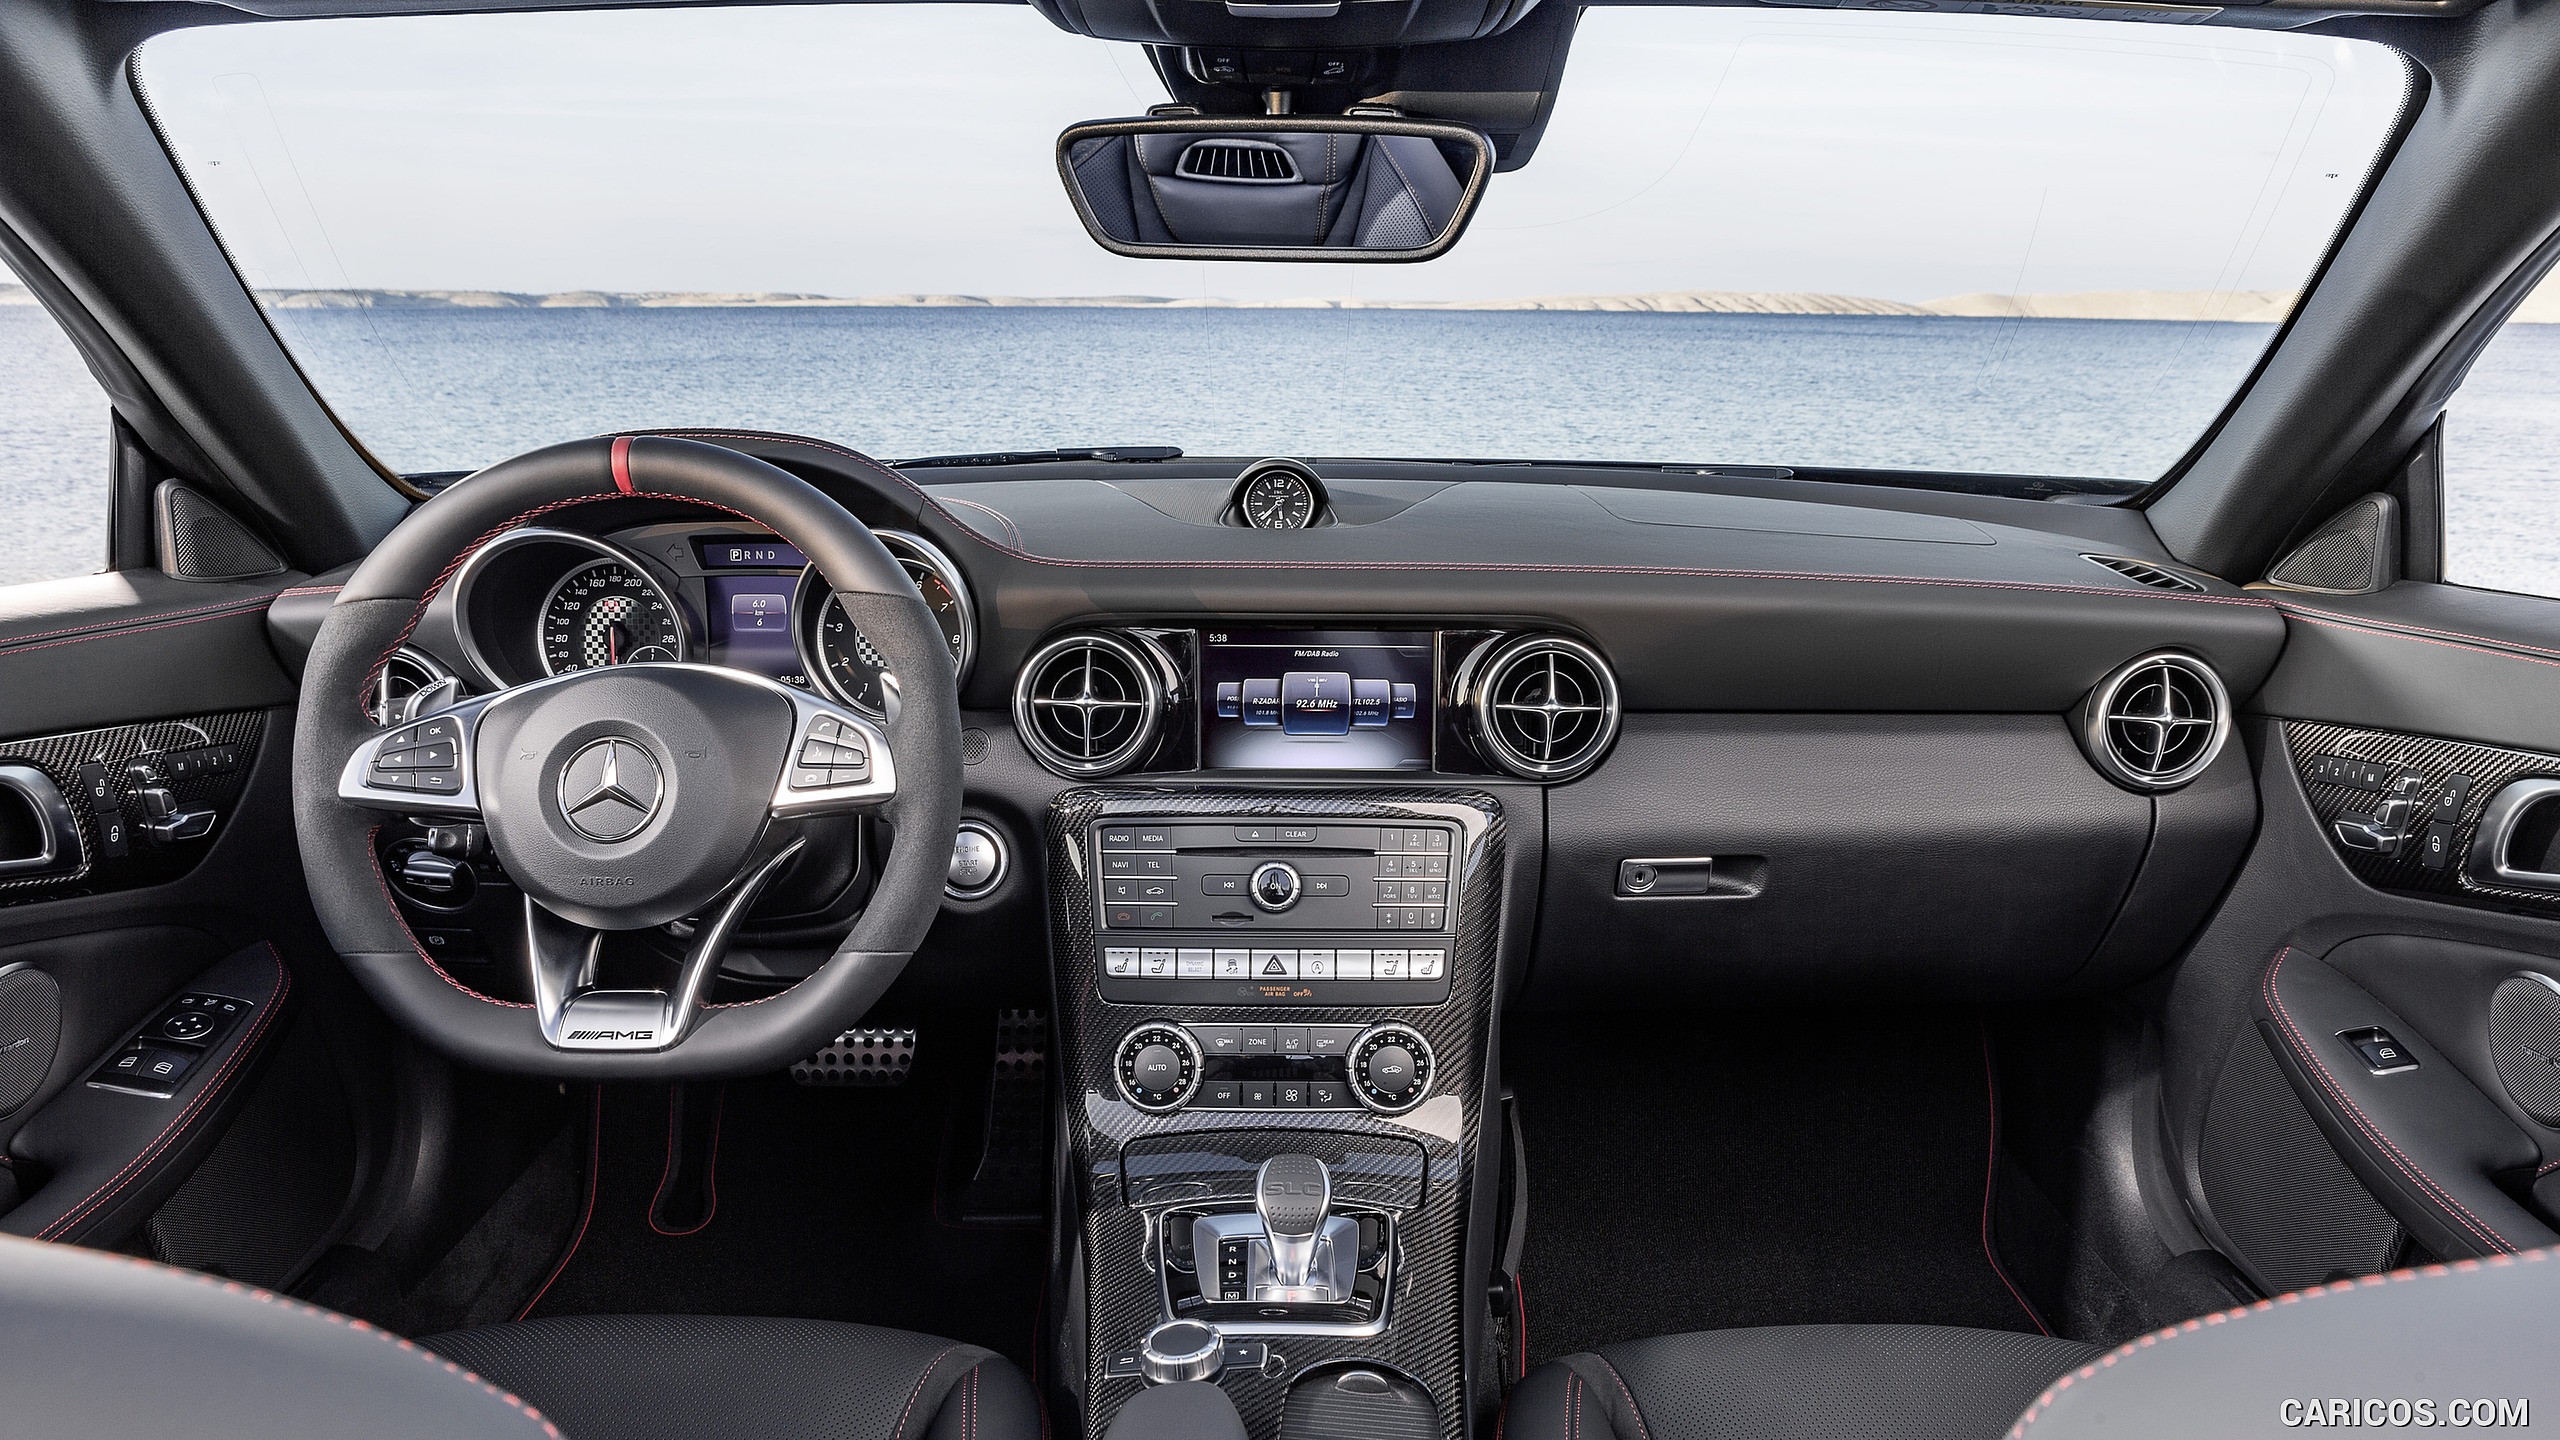 2017 Mercedes-AMG SLC 43 - Nappa Leather Interior with Red Topstiching - Interior, Cockpit, #21 of 92